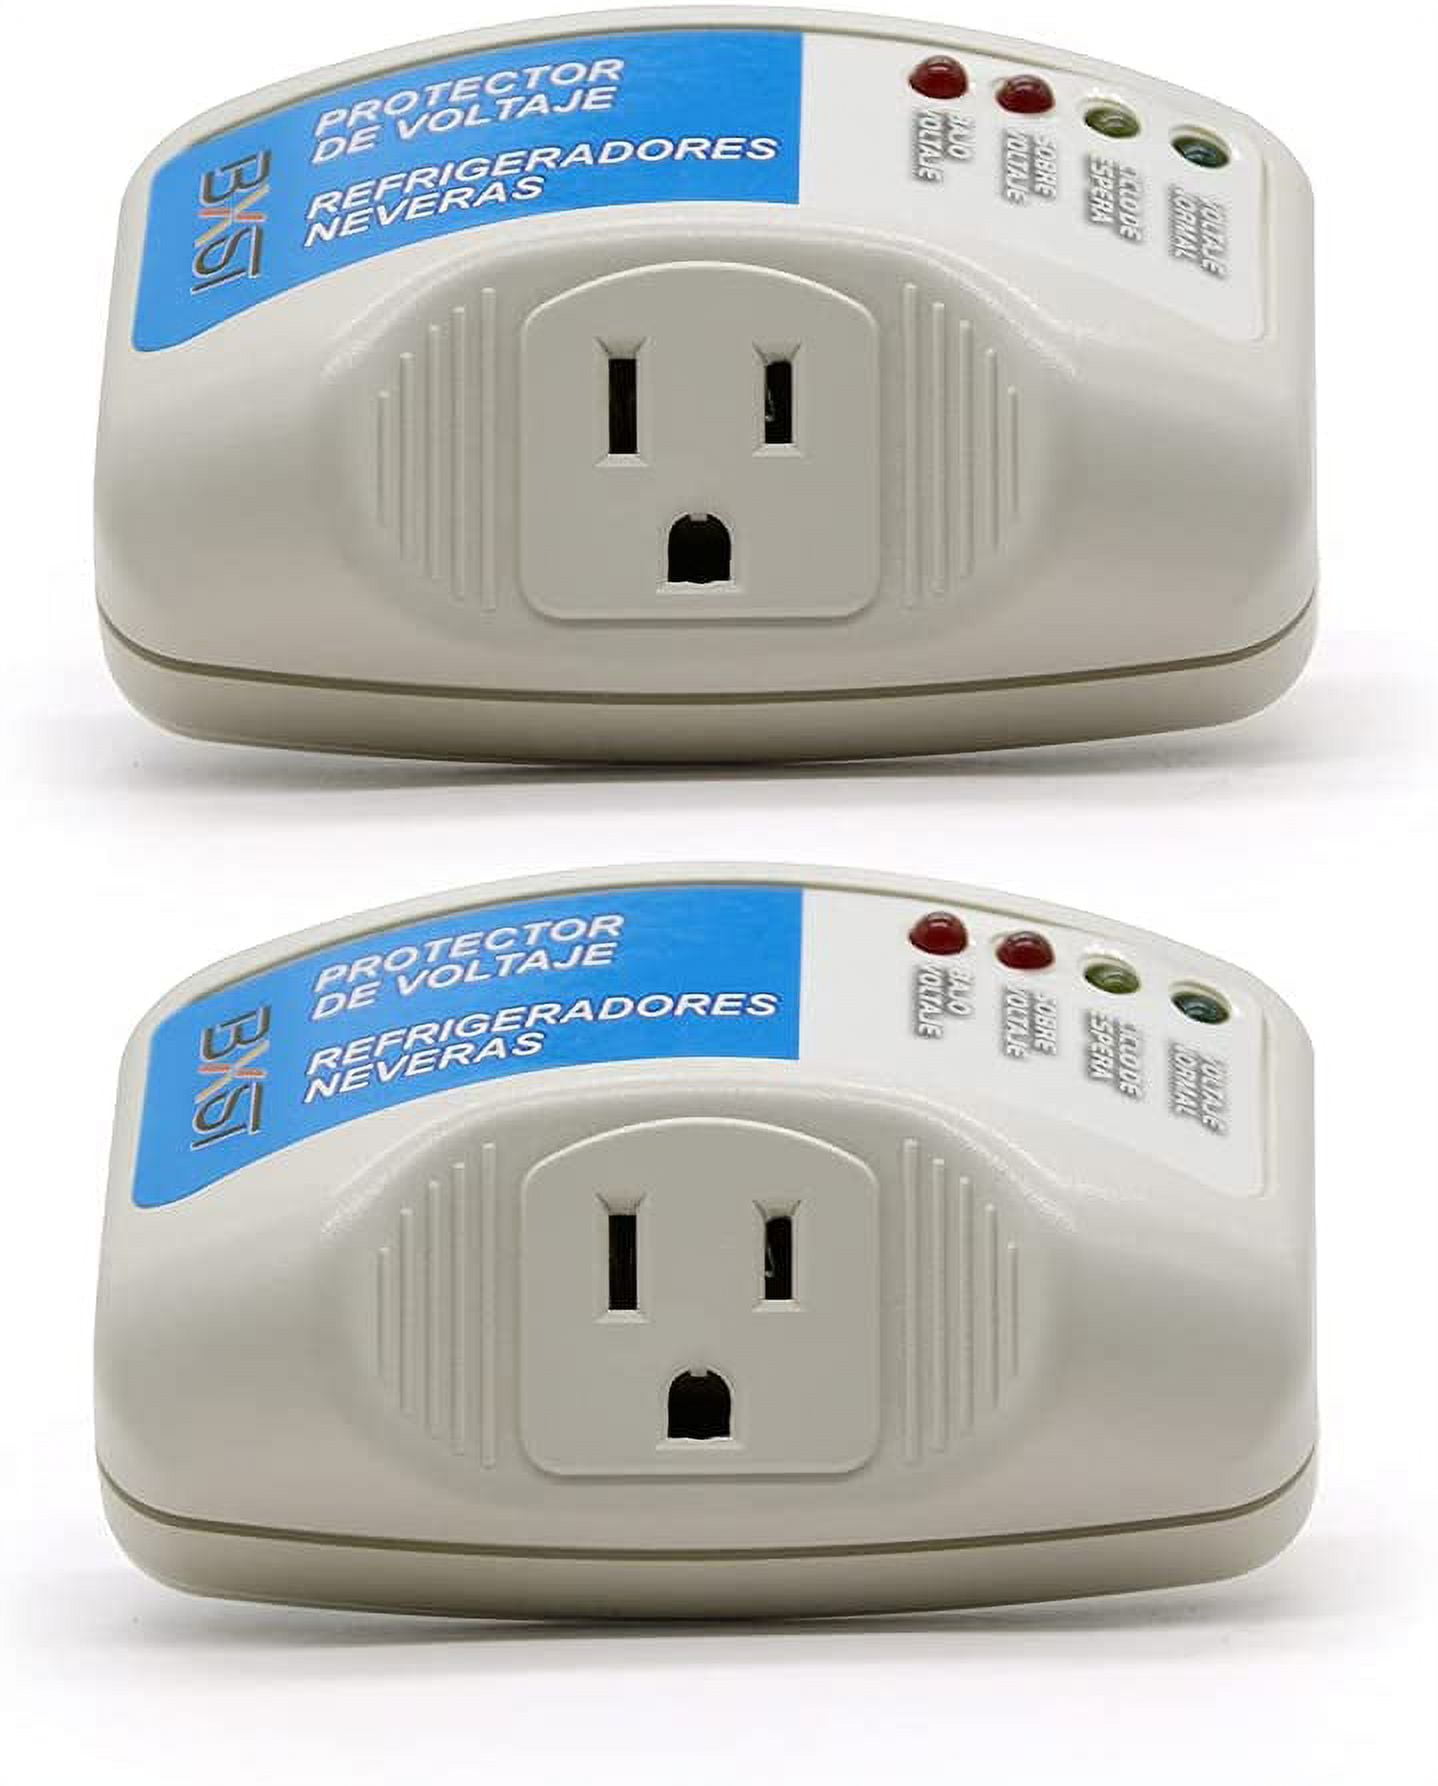 Voltage Protector Appliances, Electrical Surge Protector